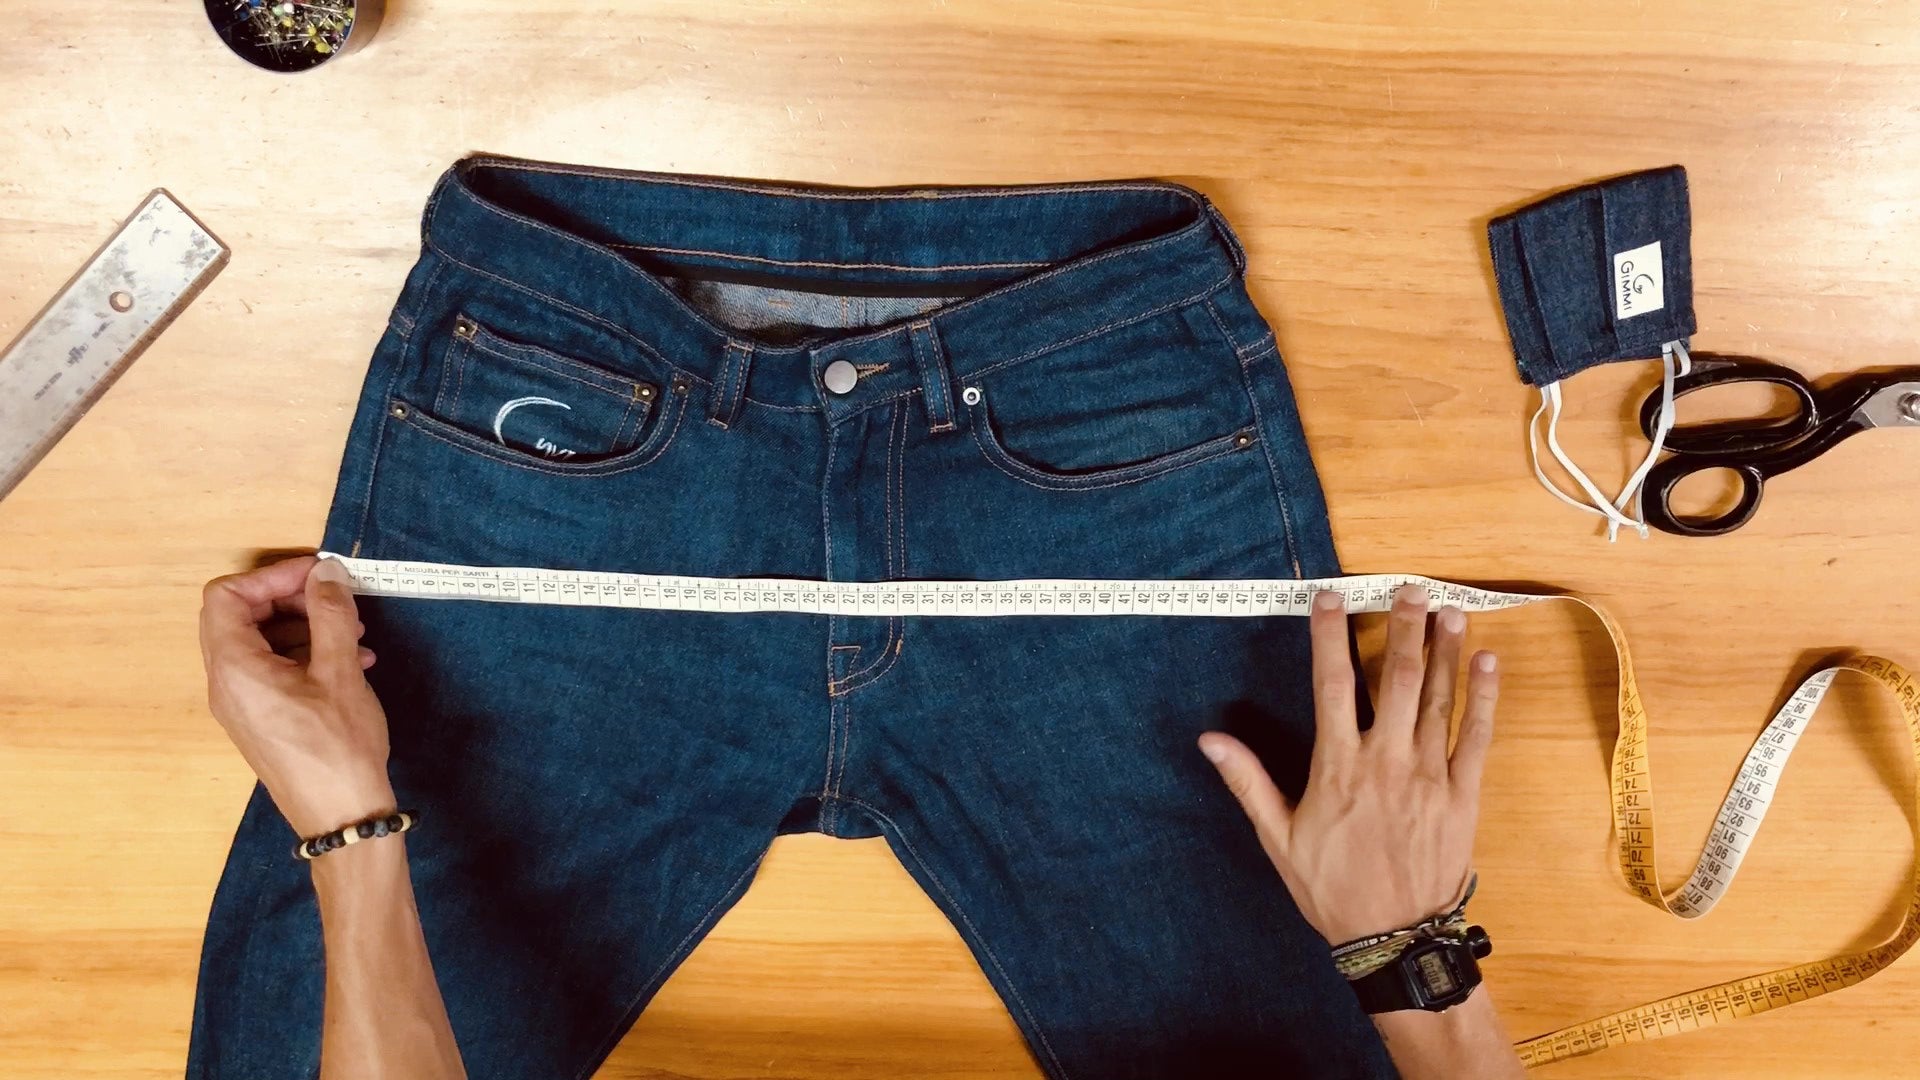 Load video: Illustrative video, on how to take the main measurements of your trousers, to avoid possible returns and reduce further environmental impacts due to shipments. Thanks for your collaboration ❤️❤️